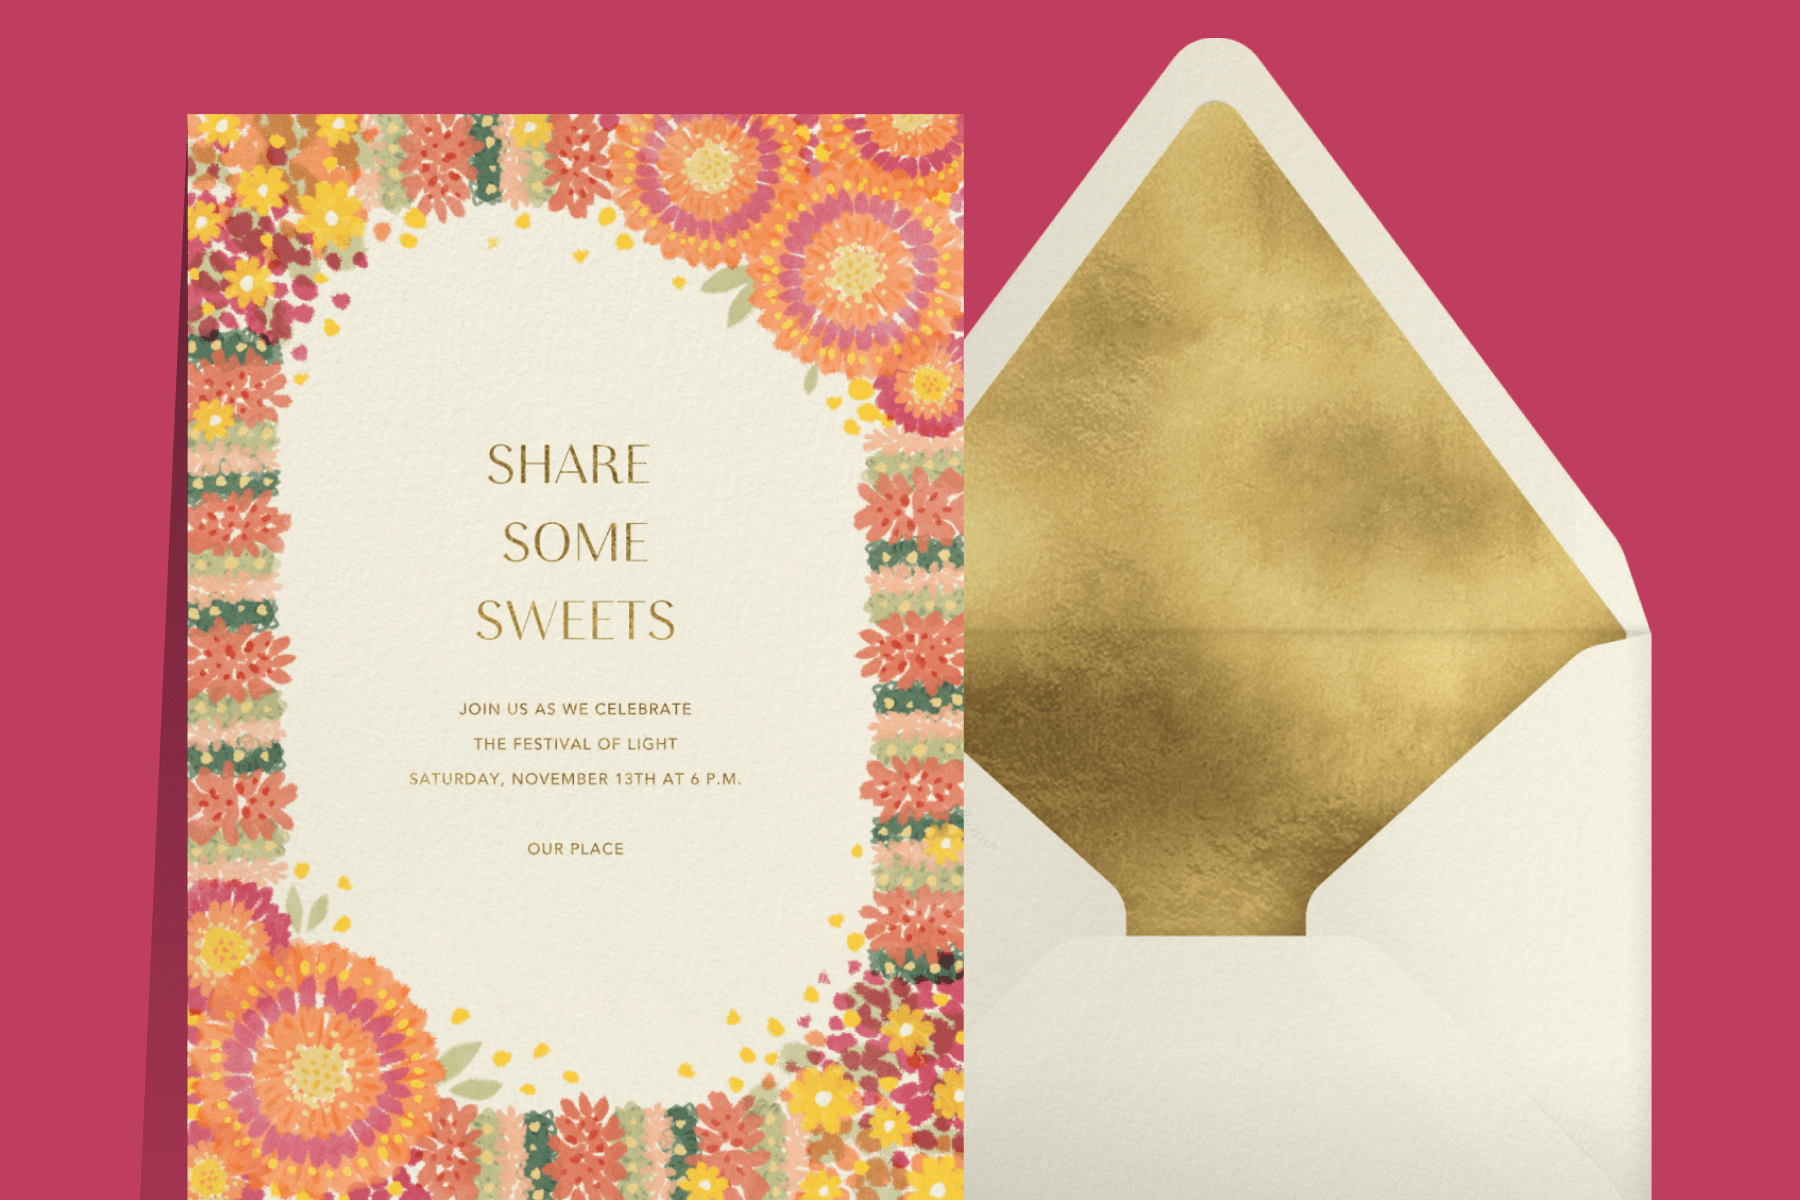 A Diwali invitation featuring illustrations of pink and orange flowers.